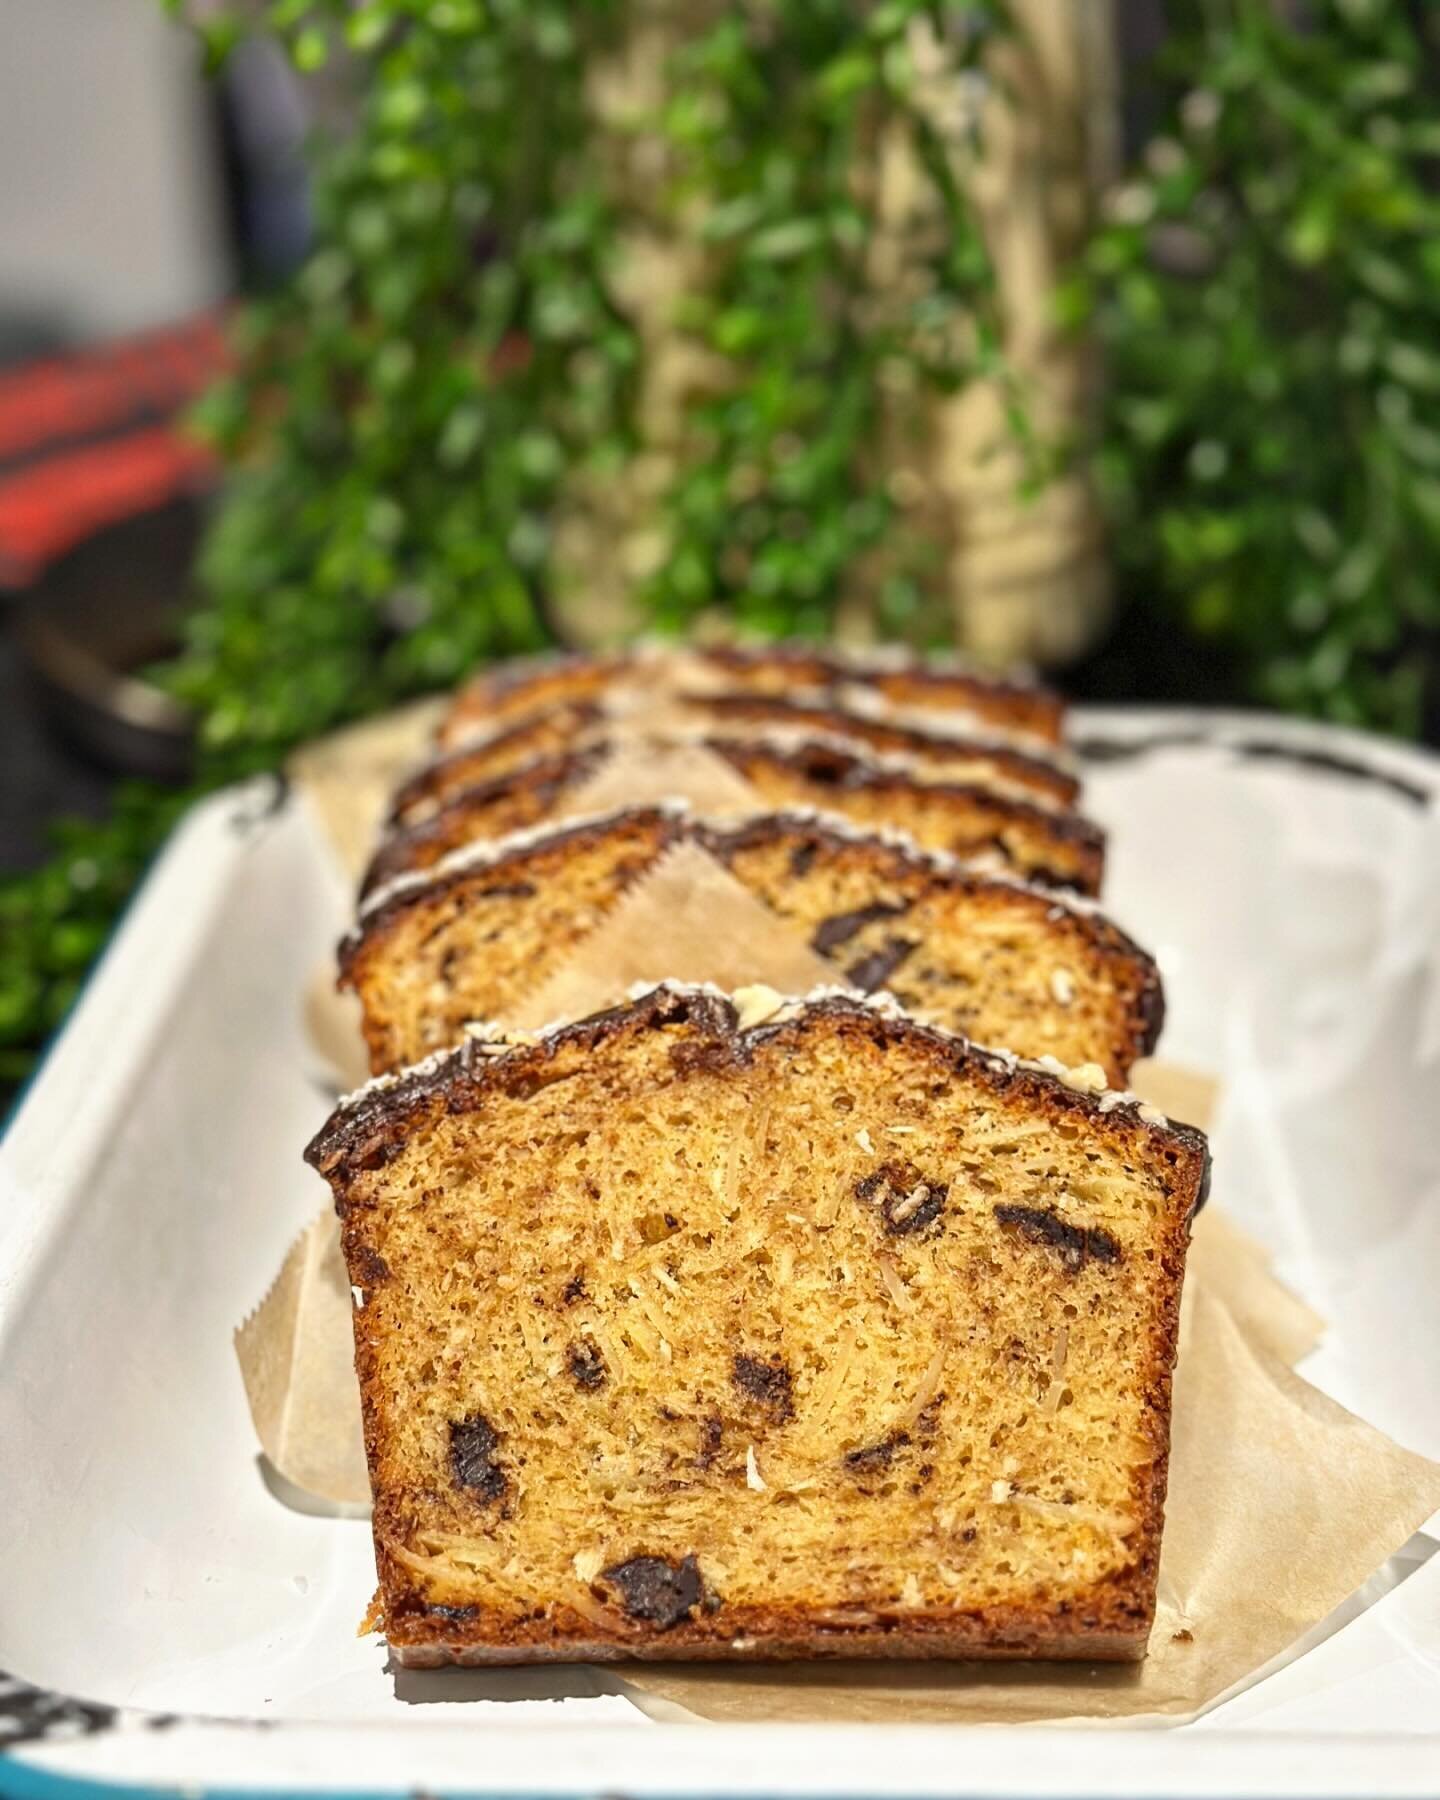 There&rsquo;s a new loaf in town! Chocolate, almond and coconut come together for a tasty treat inspired by the Almond Joy candy bar! Available daily for $4.75 🍫 🥥 (there&rsquo;s no almond emoji 🥲)